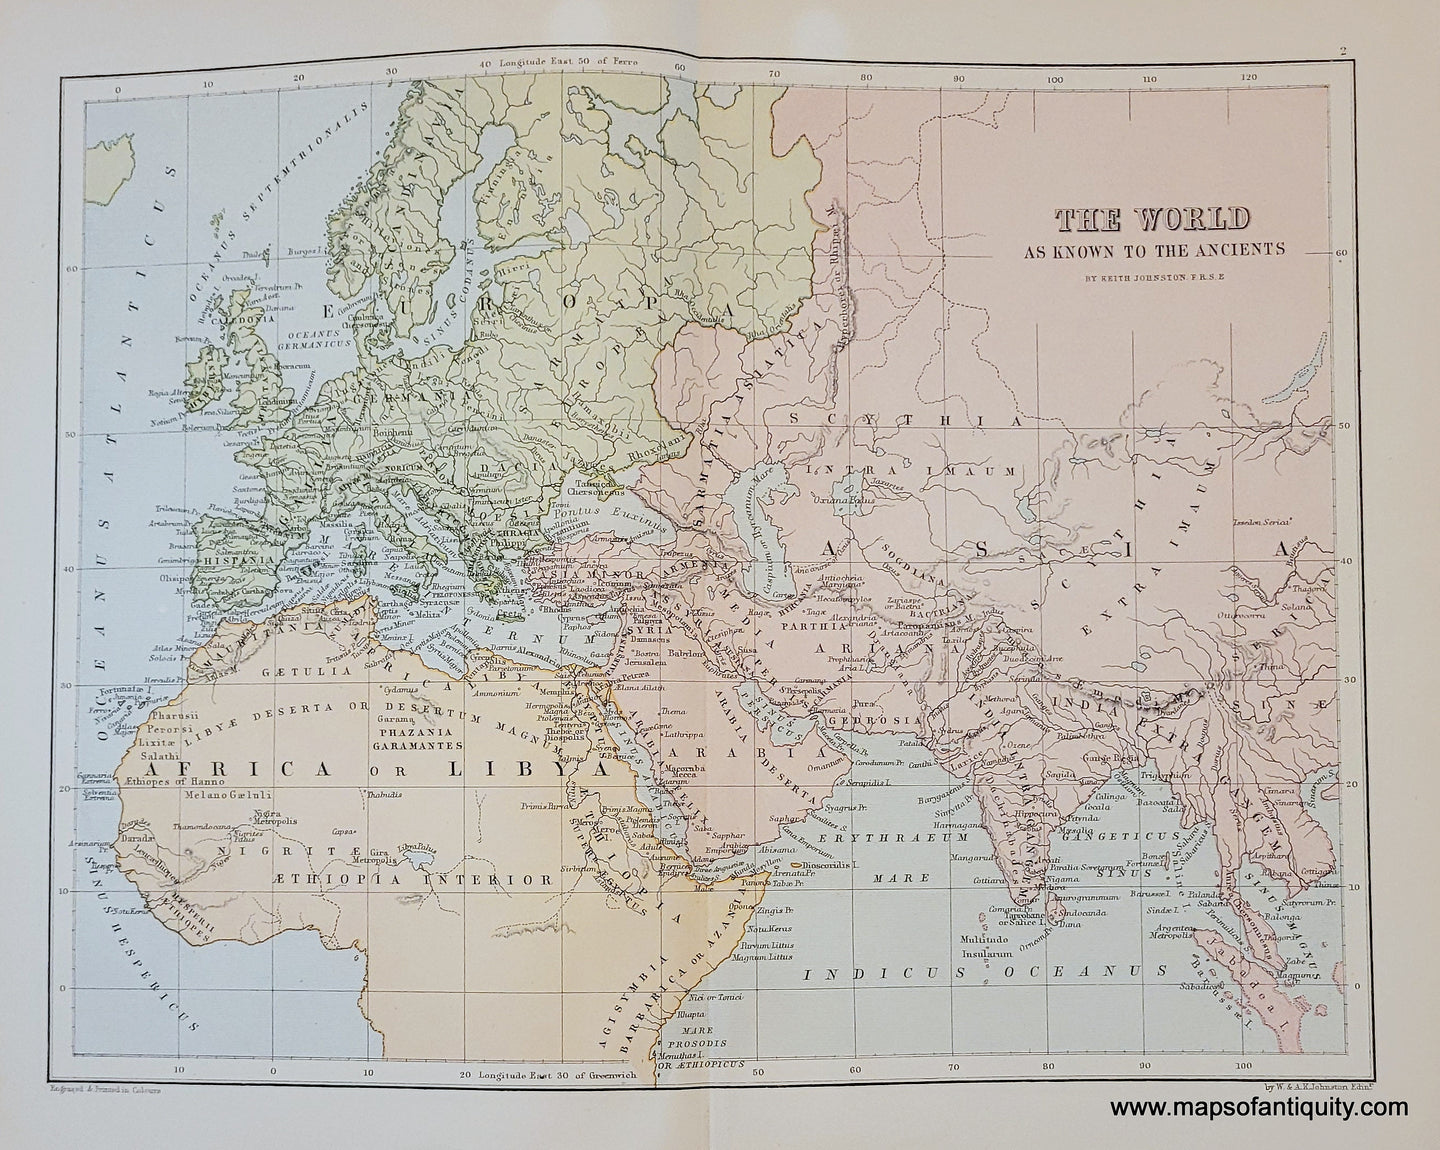 Genuine-Antique-Map-The-World-as-Known-to-the-Ancients-1910-Johnston-Maps-Of-Antiquity